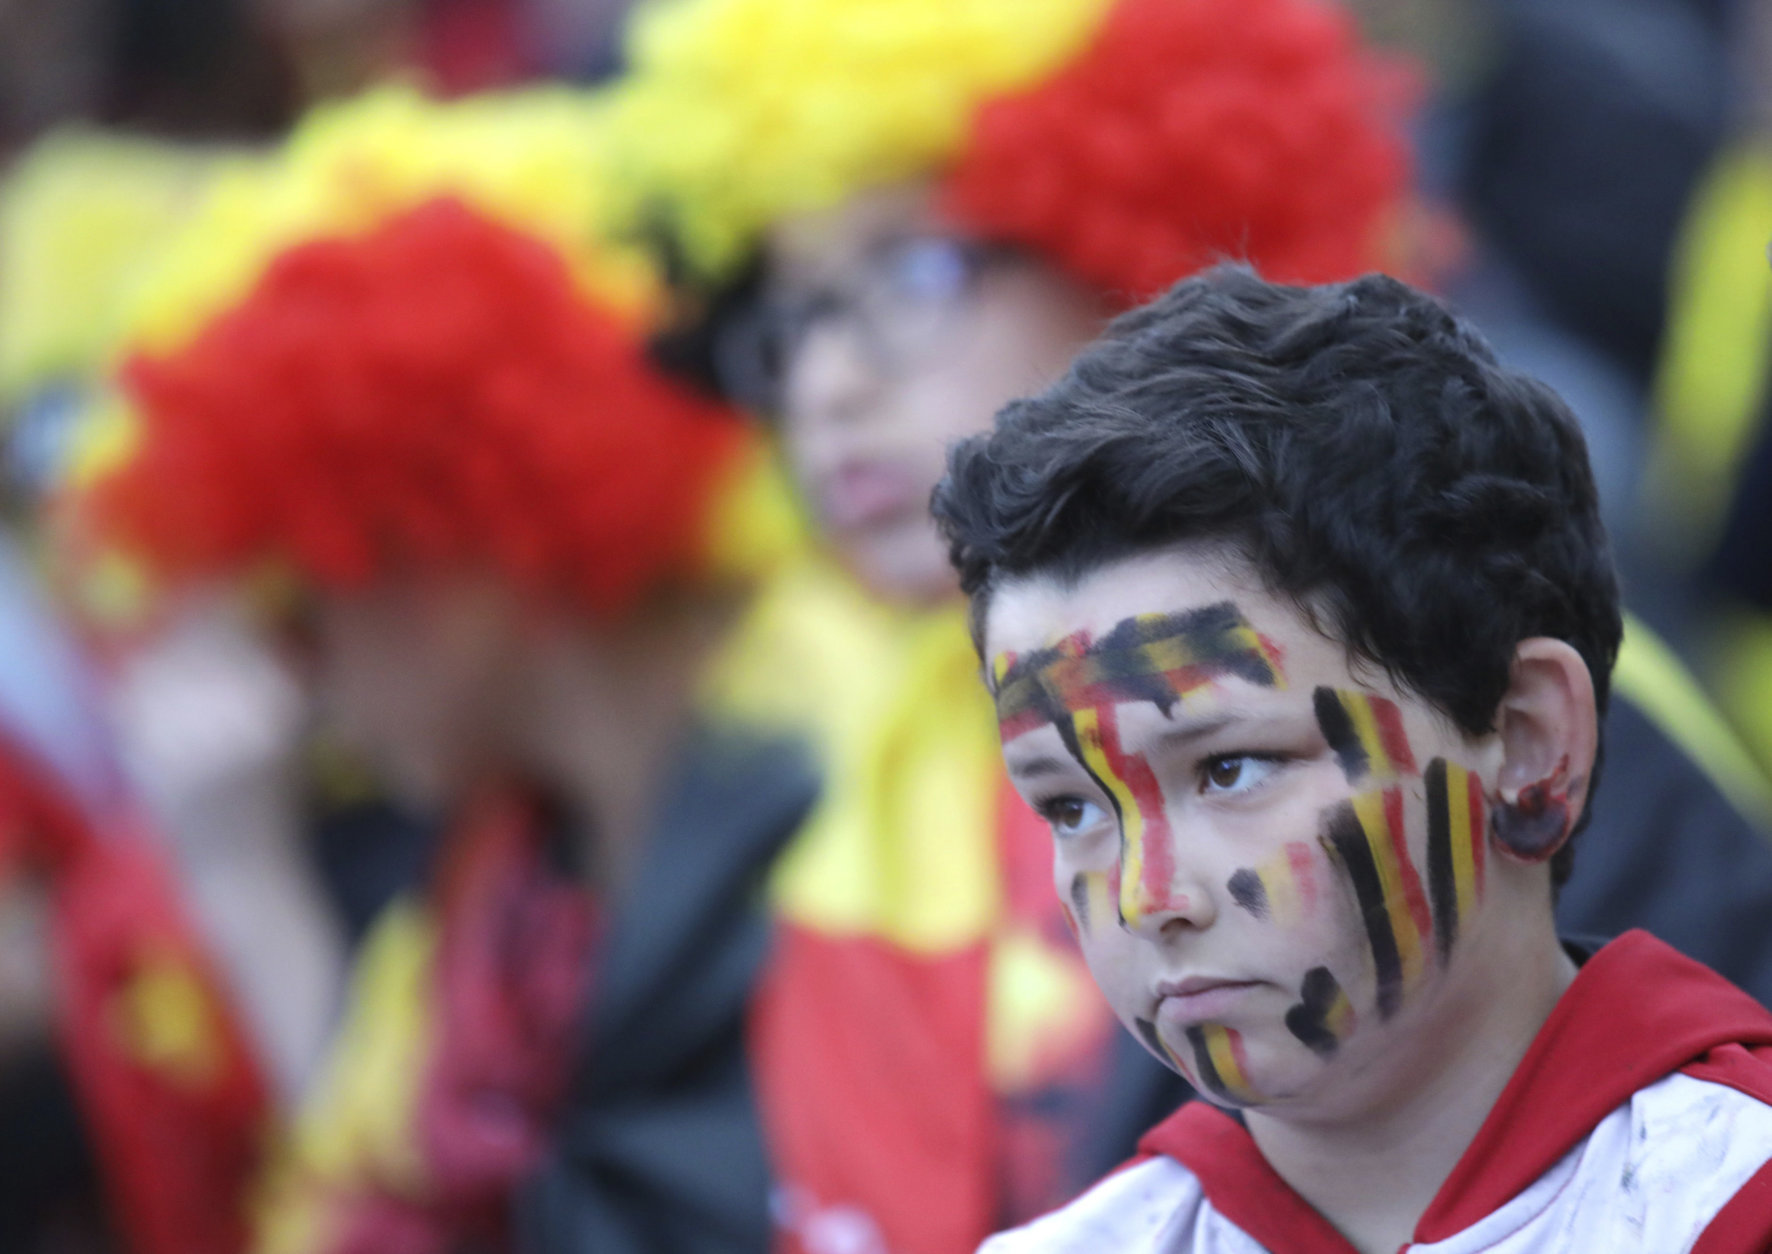 A Belgium fan reacts as he watches a 2018 World Cup semifinal soccer match between France and Belgium on a giant screen in Jette, Belgium, Tuesday, July 10, 2018. (AP Photo/Olivier Matthys)